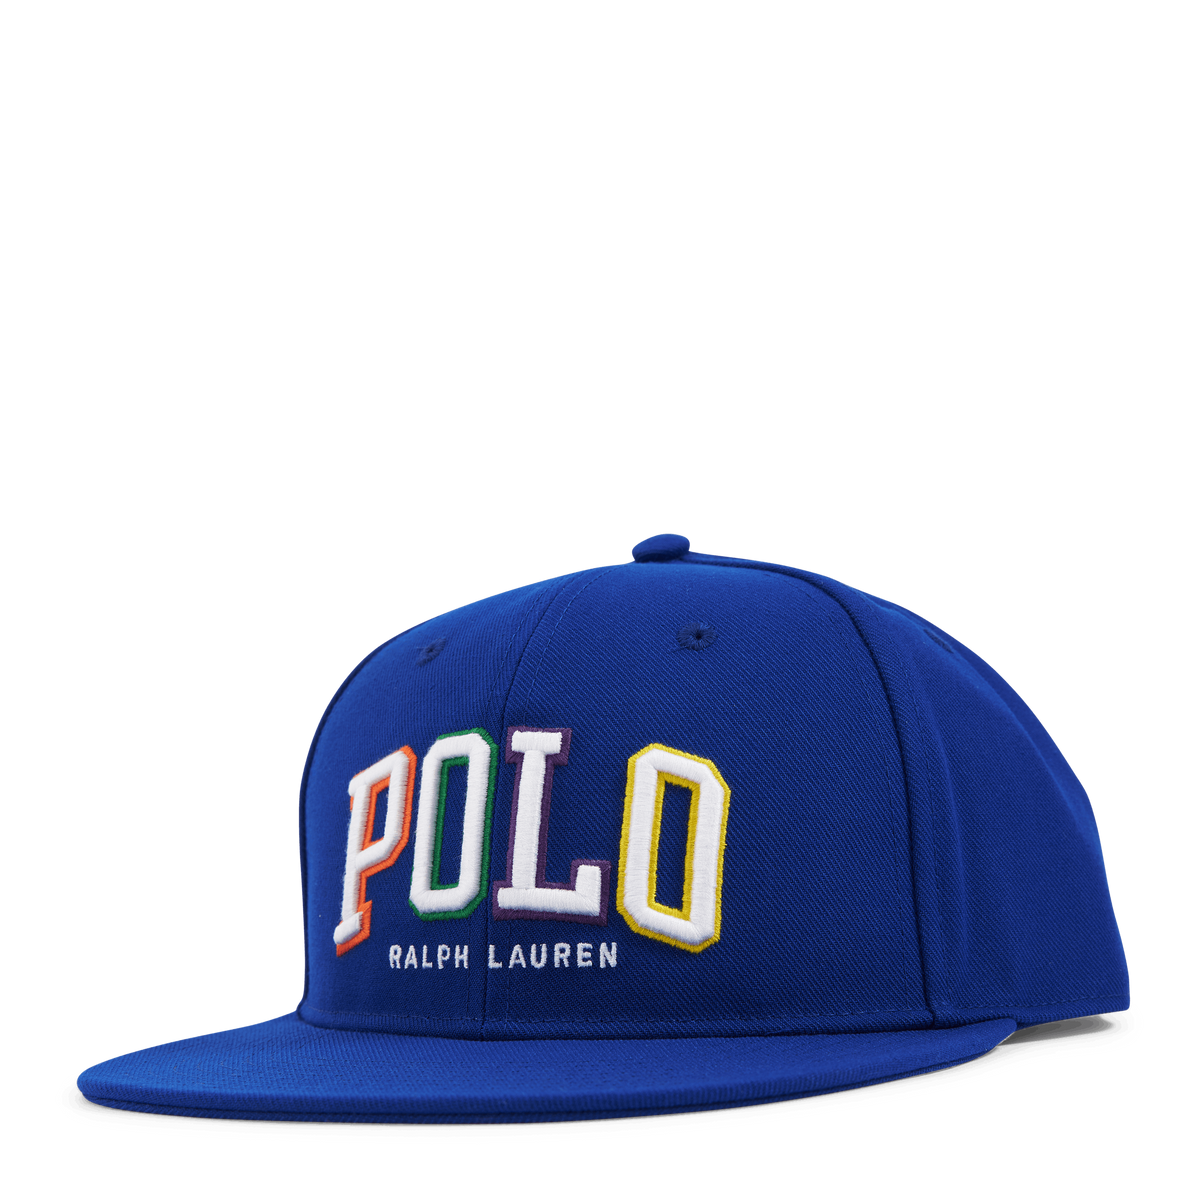 Logo-Embroidered Twill Ball Cap